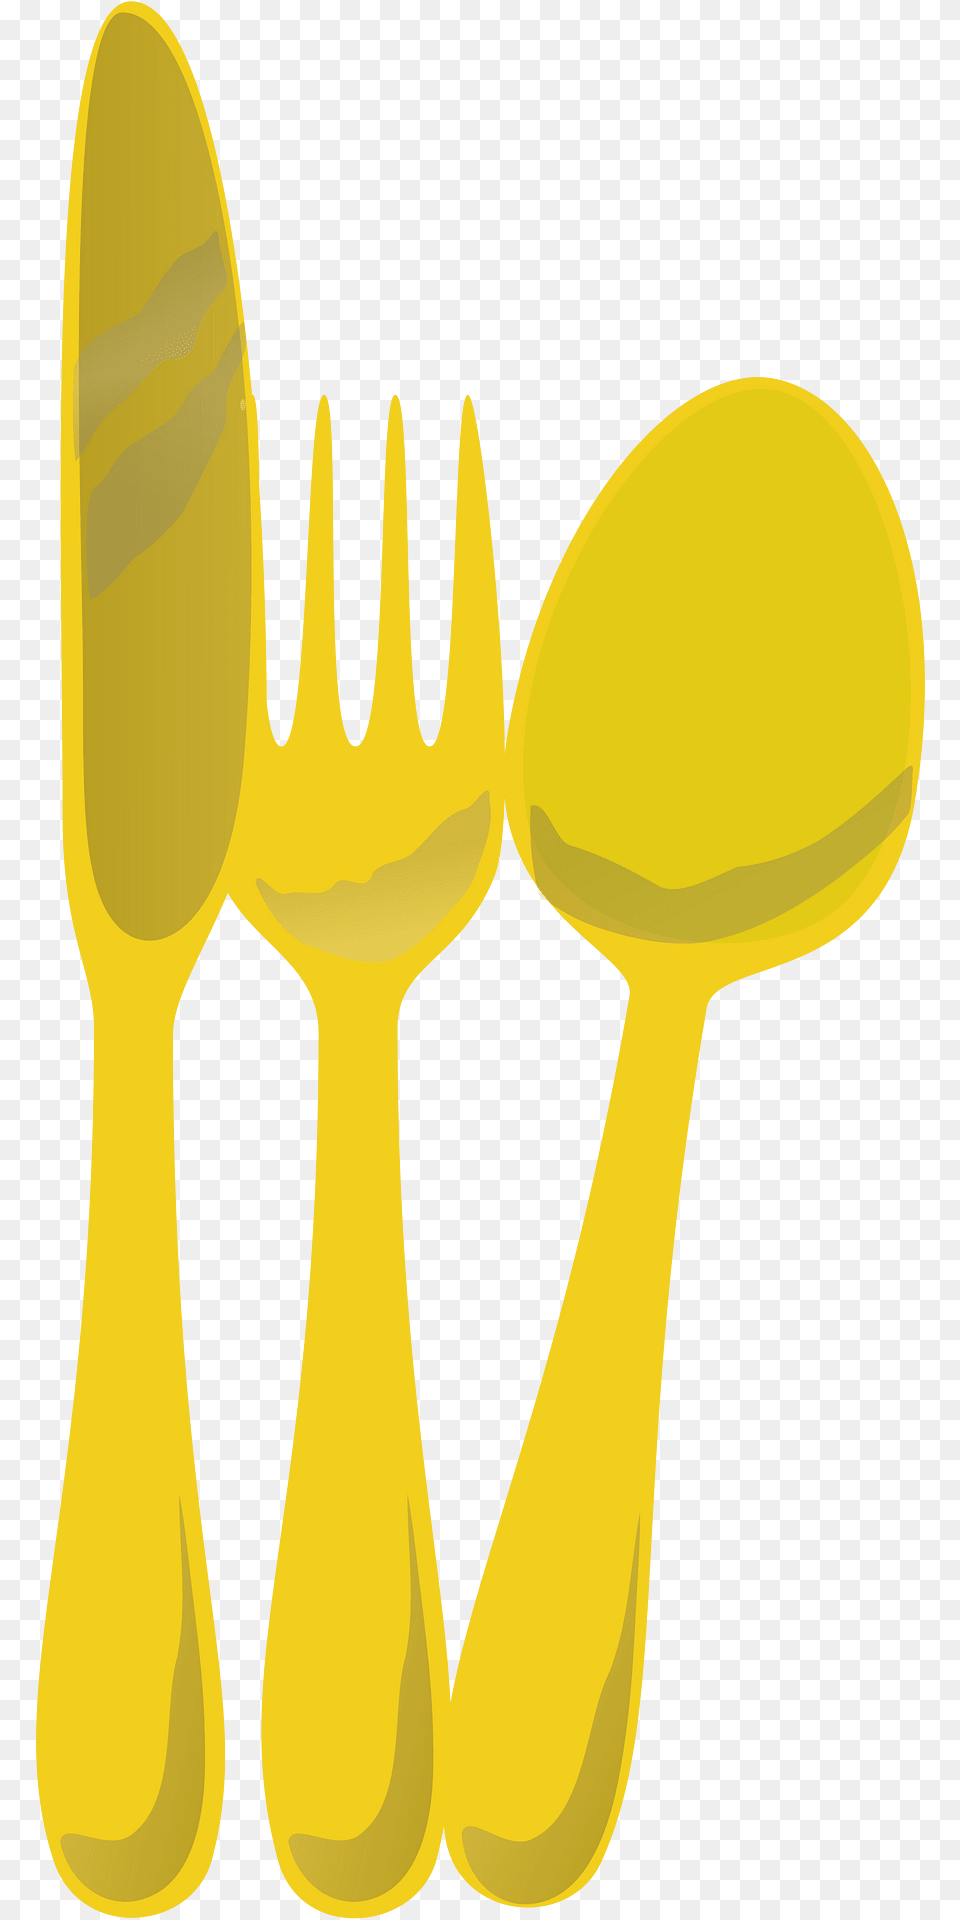 Cutlery Clipart, Fork, Spoon, Smoke Pipe Png